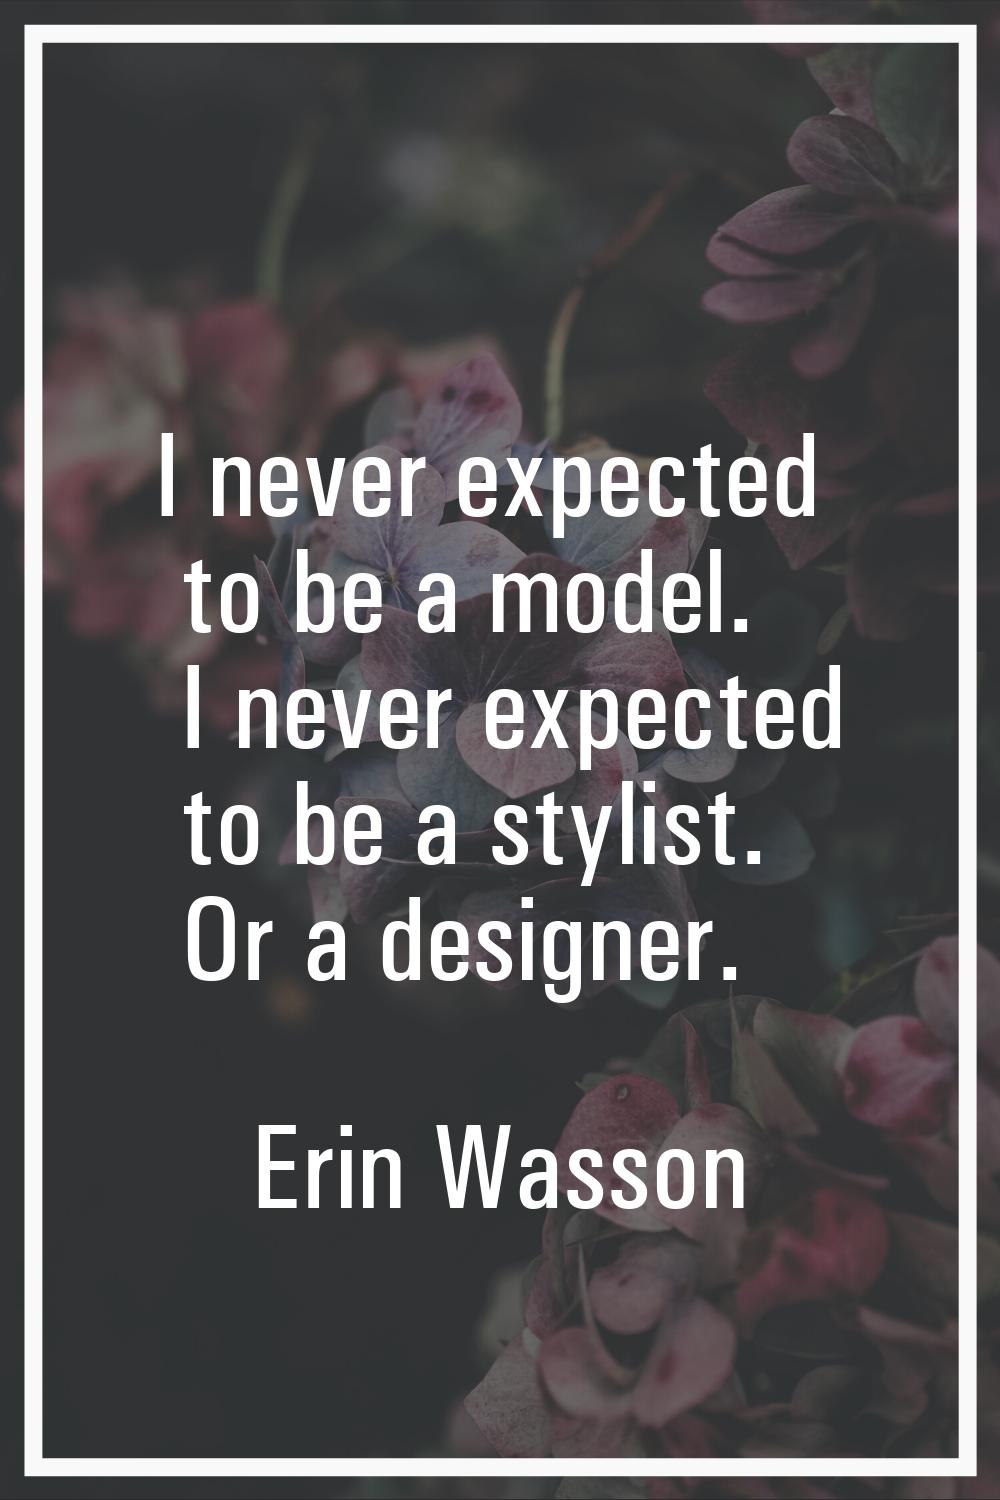 I never expected to be a model. I never expected to be a stylist. Or a designer.